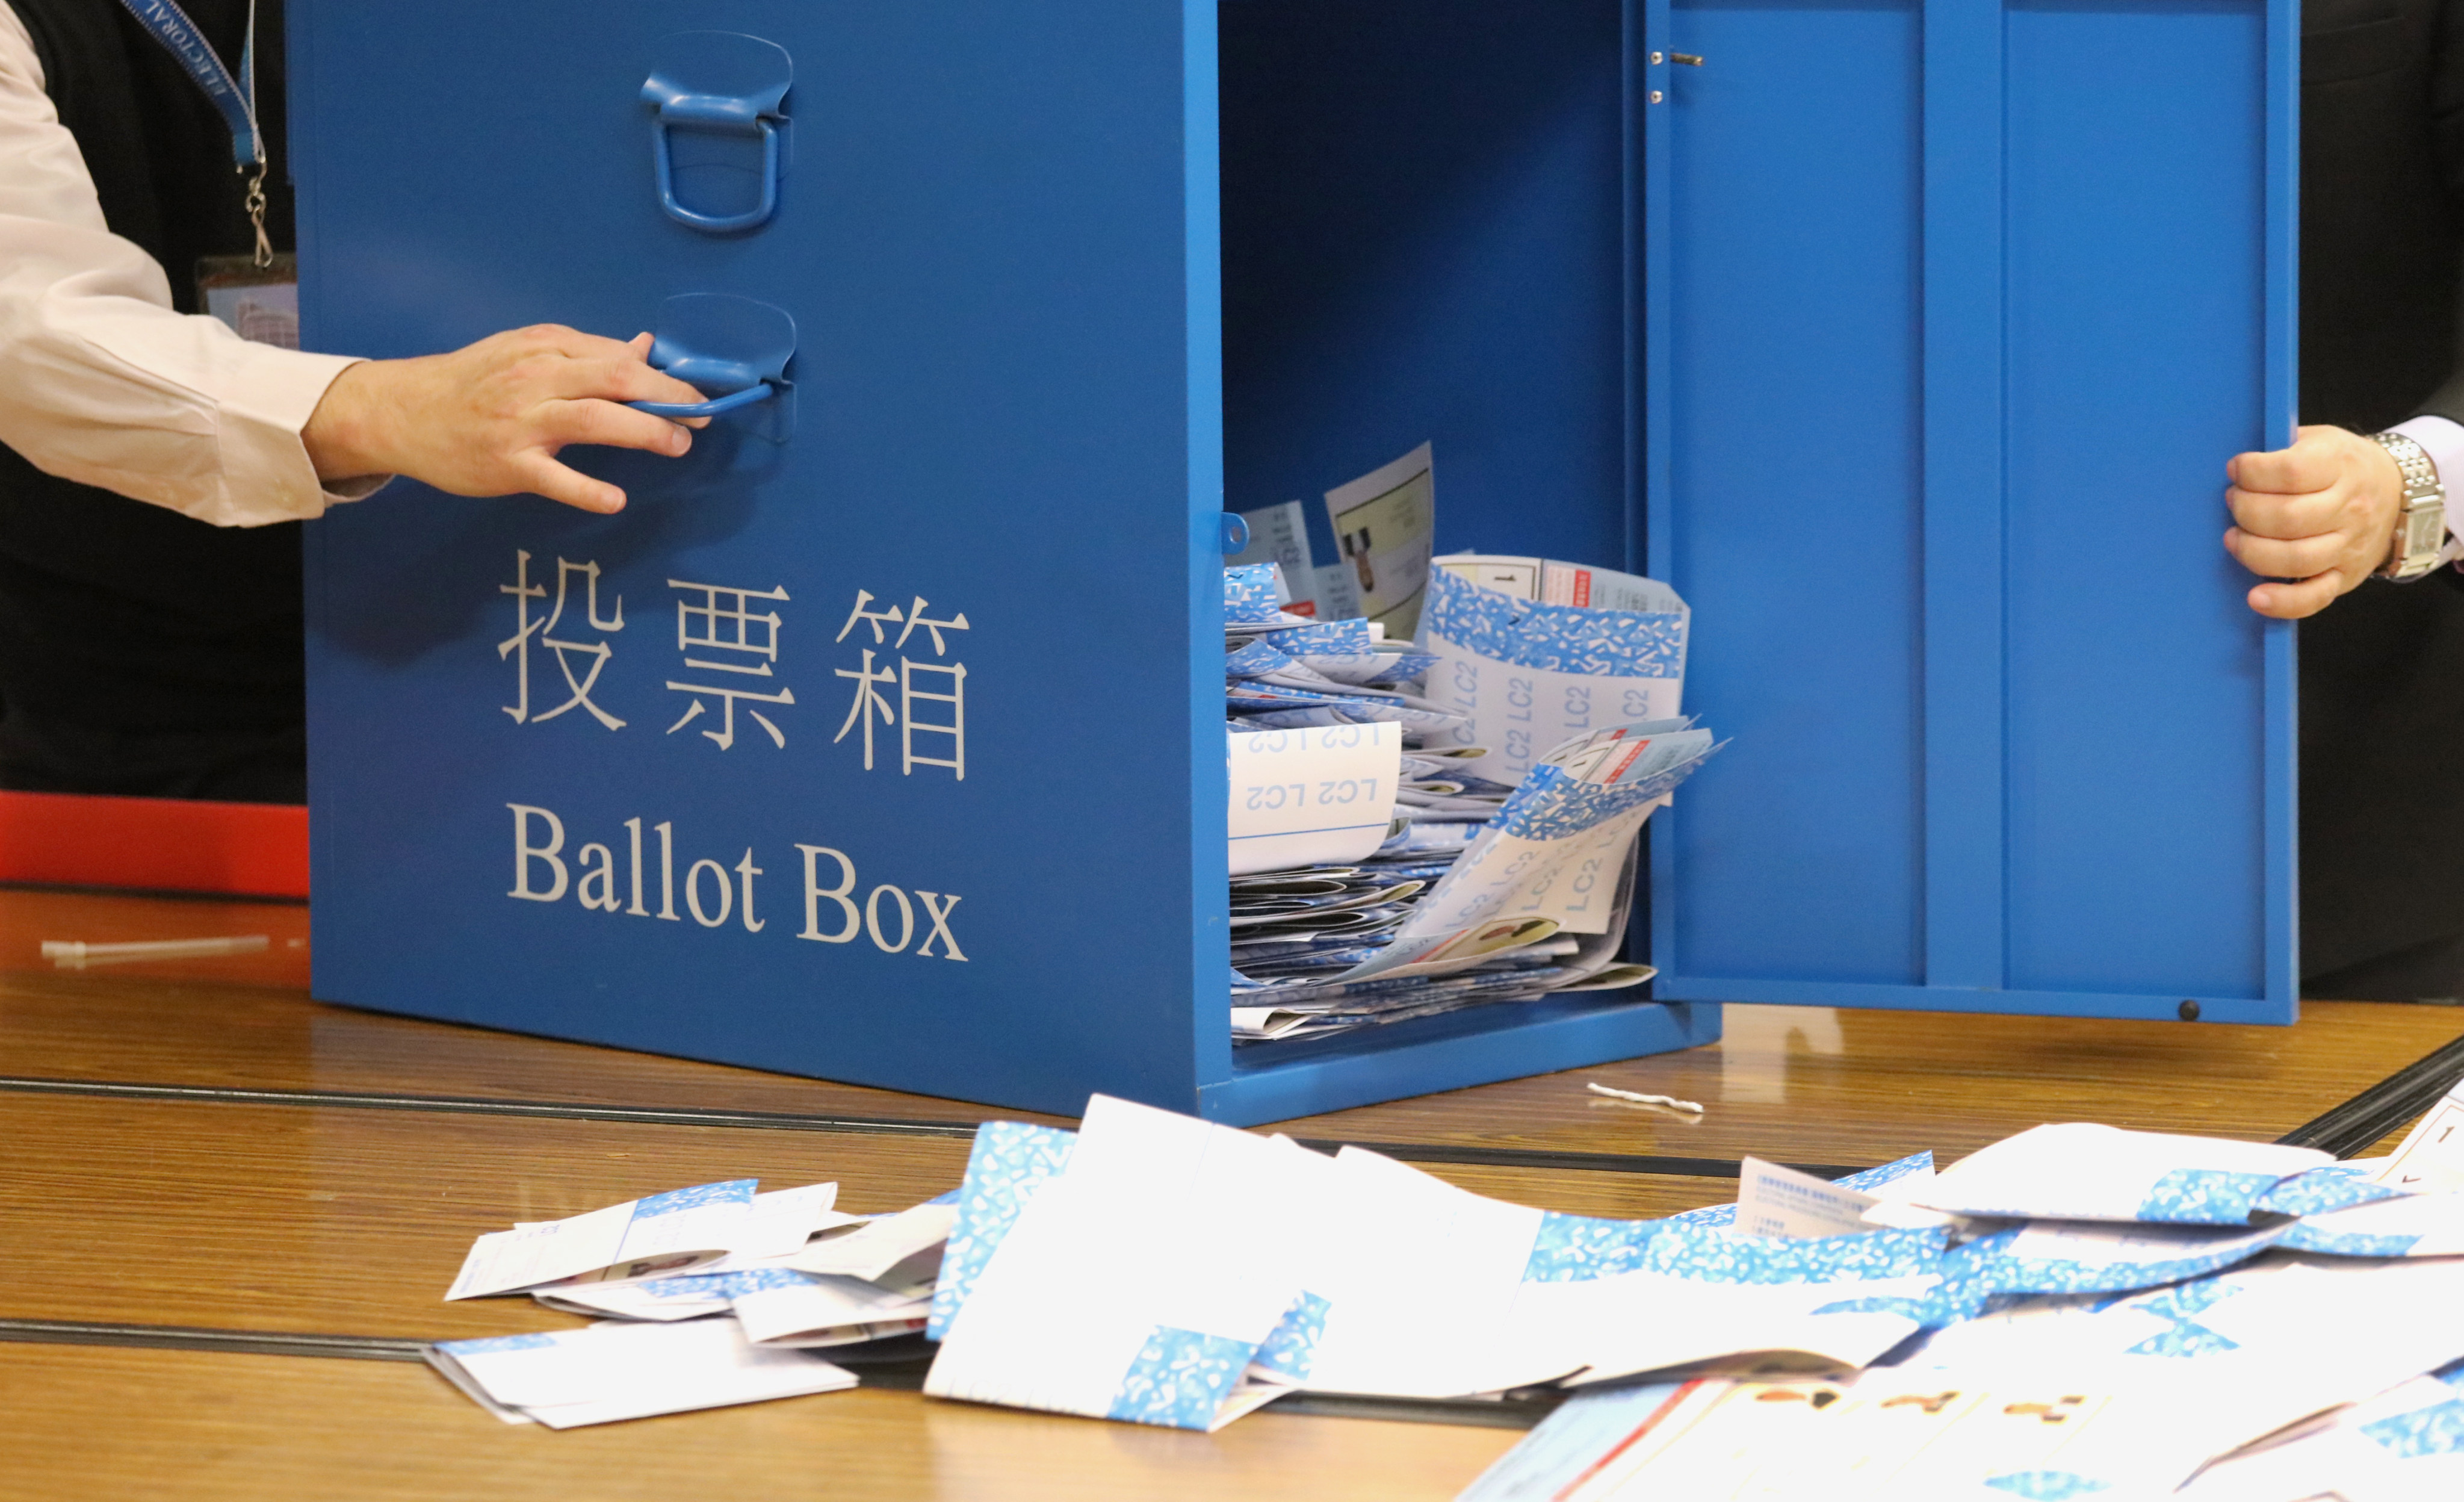 Hong Kong’s youth have lost interest in local politics after election reforms, analysts say. Photo: Felix Wong